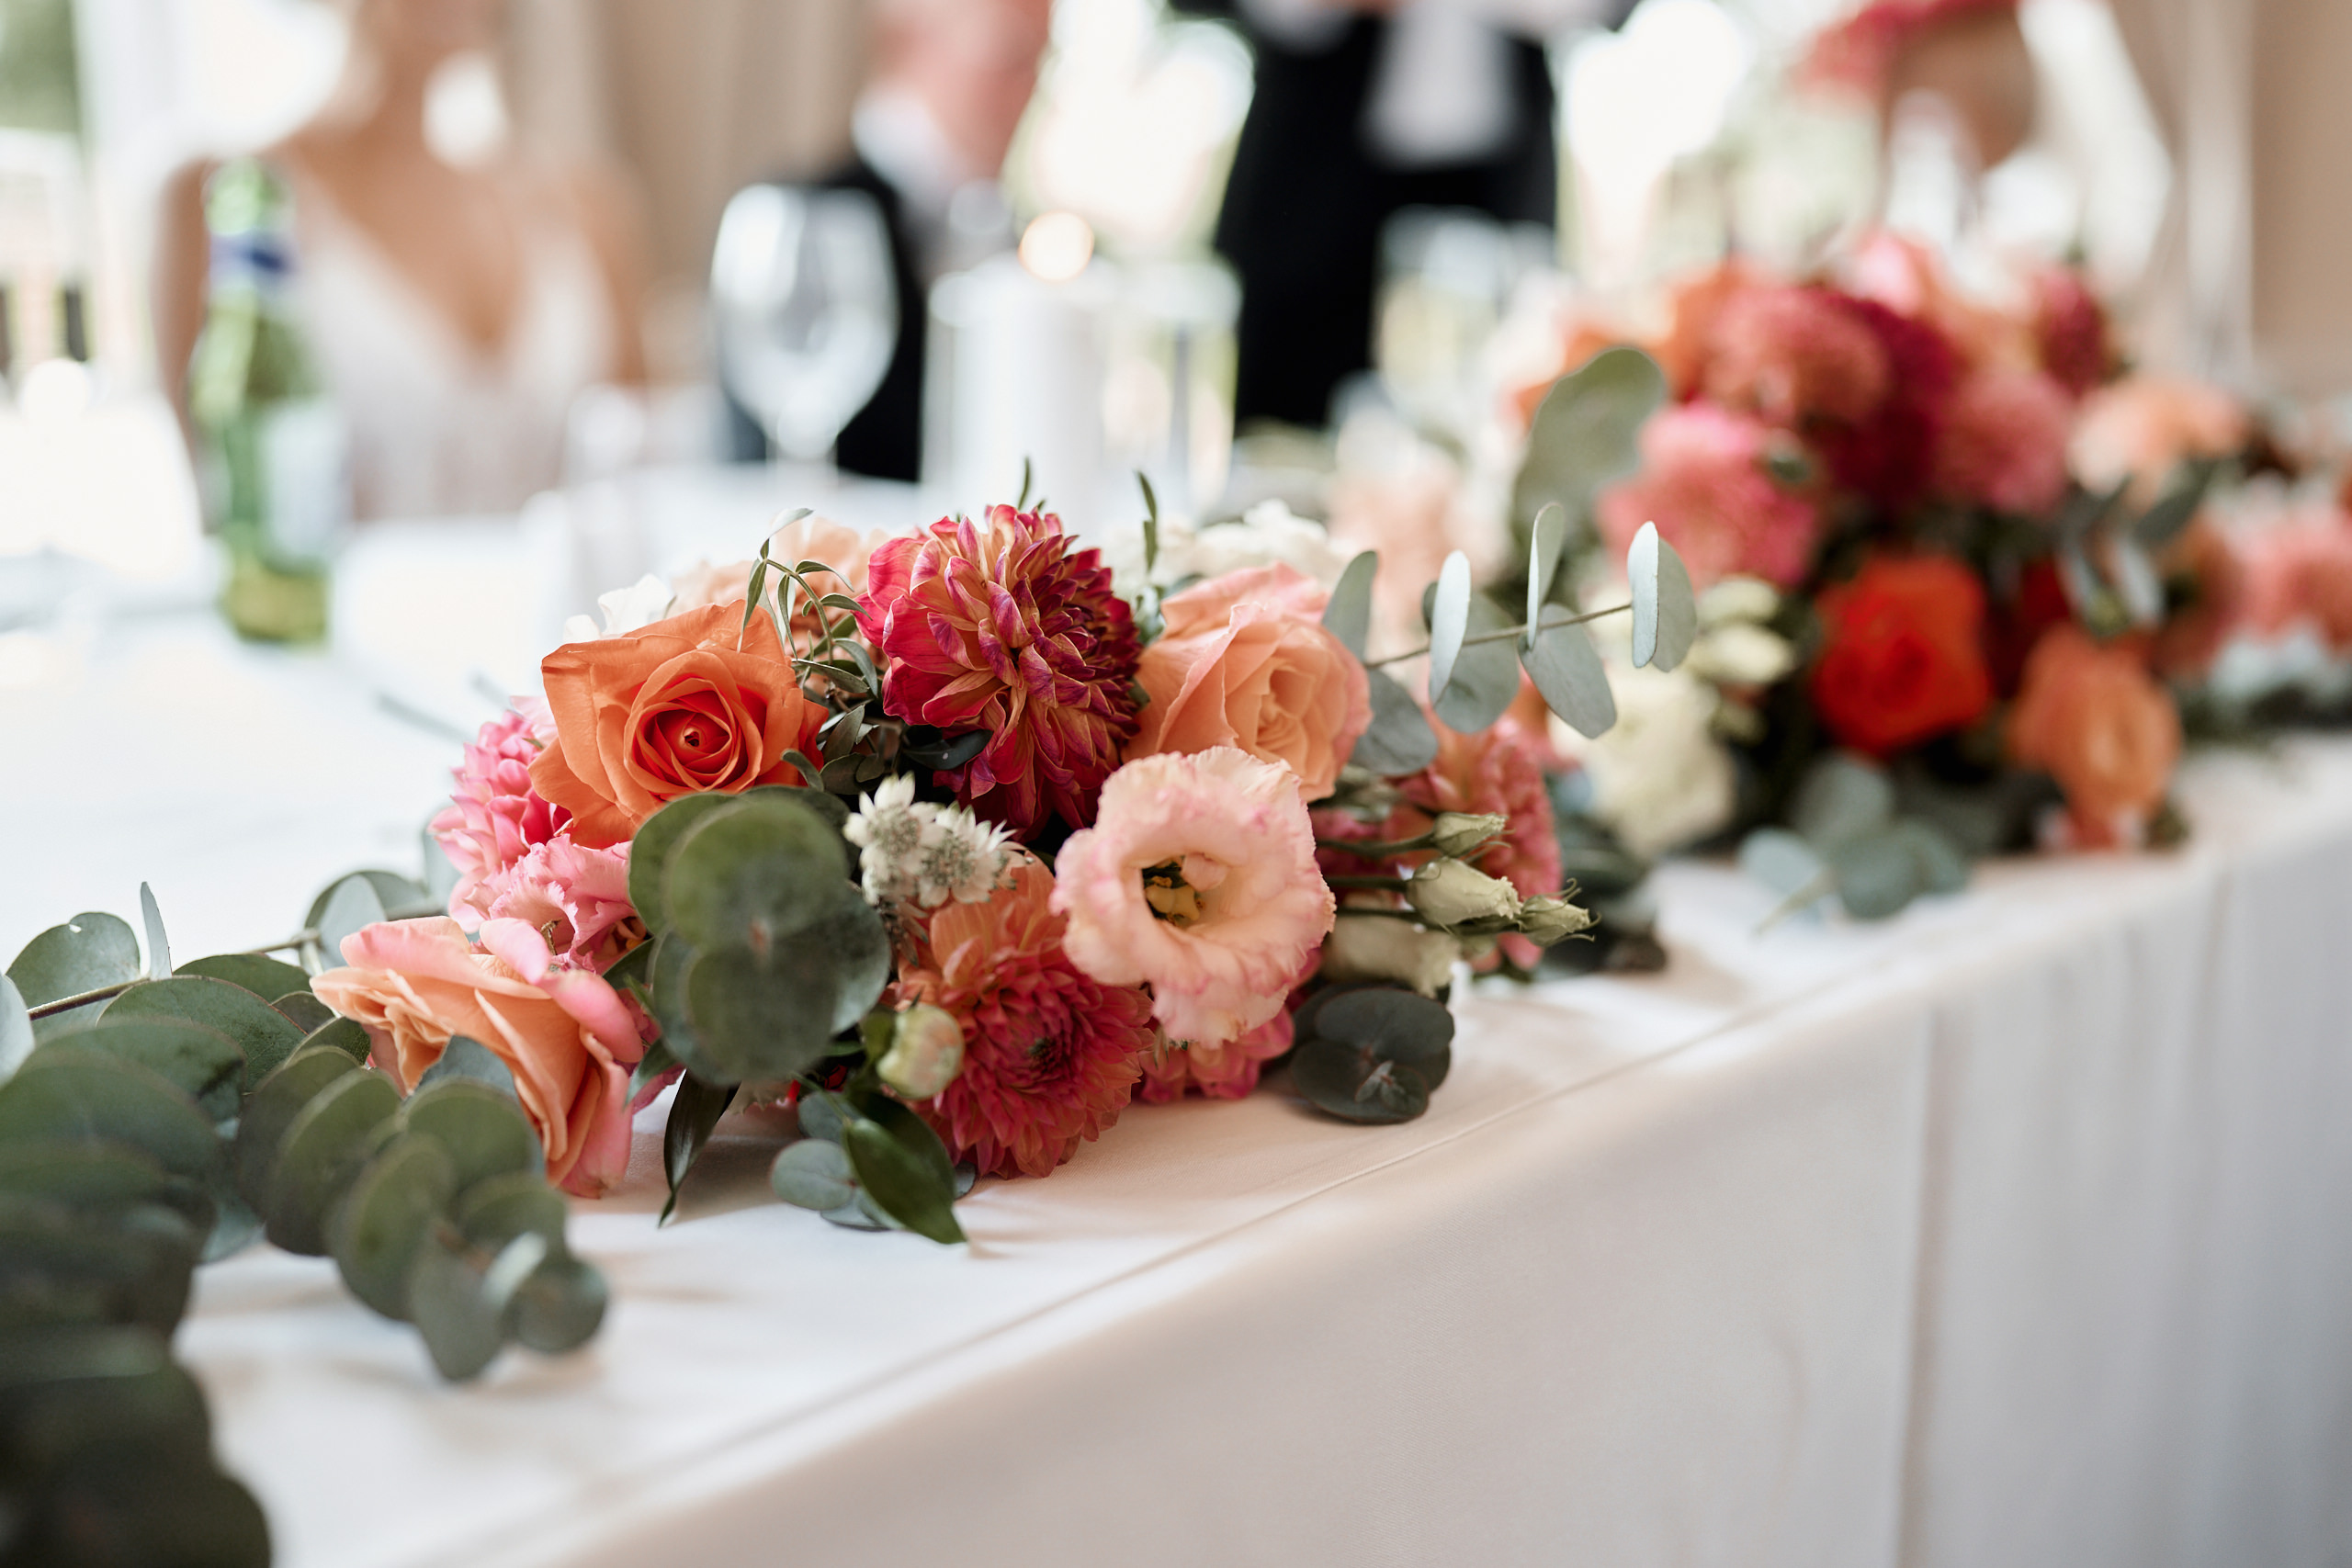 A table is decorated with pink and orange flowers.